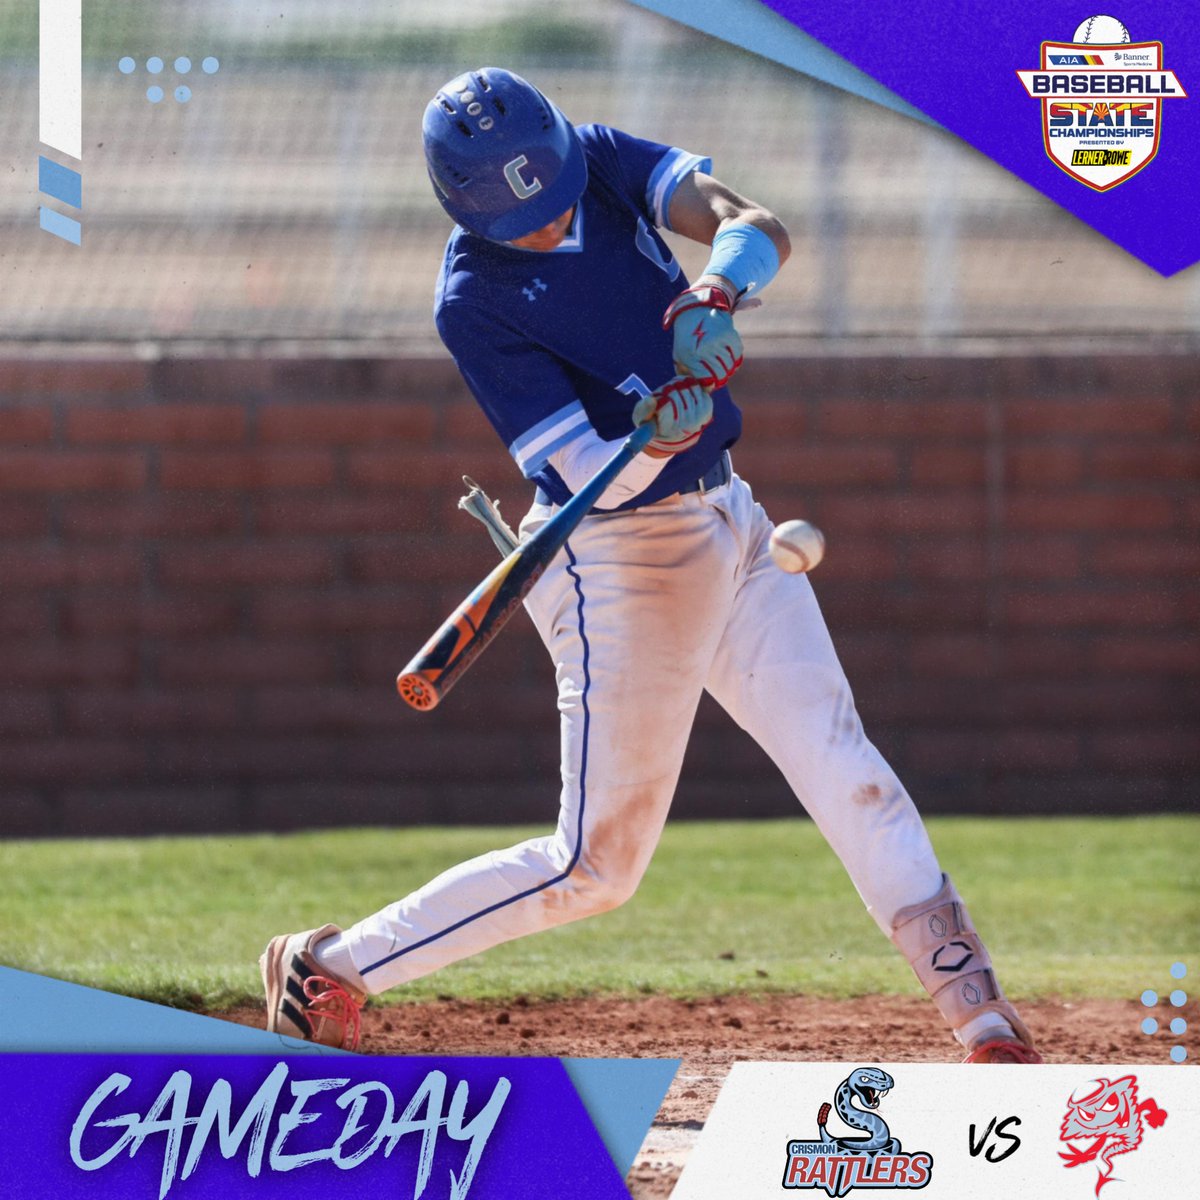 ⚾ STATE BASEBALL GAMEDAY ⚾
#10 Crismon takes on #7 River Valley in the first round of 3A State Baseball ⏰ 4 PM 
#CrismonHS #QCUSDAthletics #QCleads